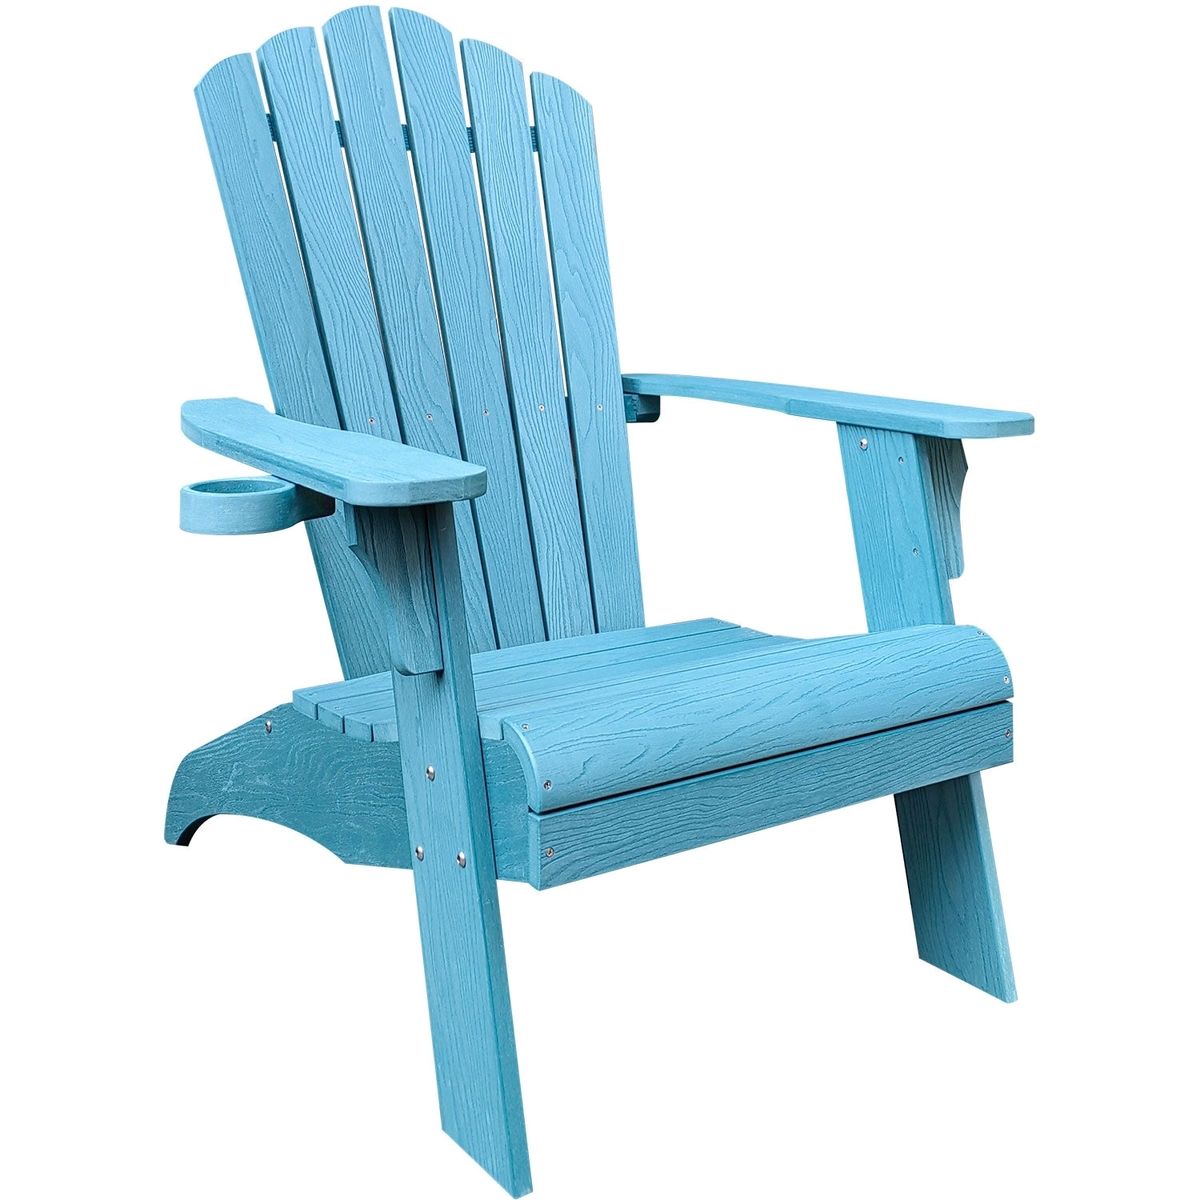 Photos - Garden Furniture QOMOTOP Poly Lumber Oversized Adirondack Chair with Cup Holder - Chair wit